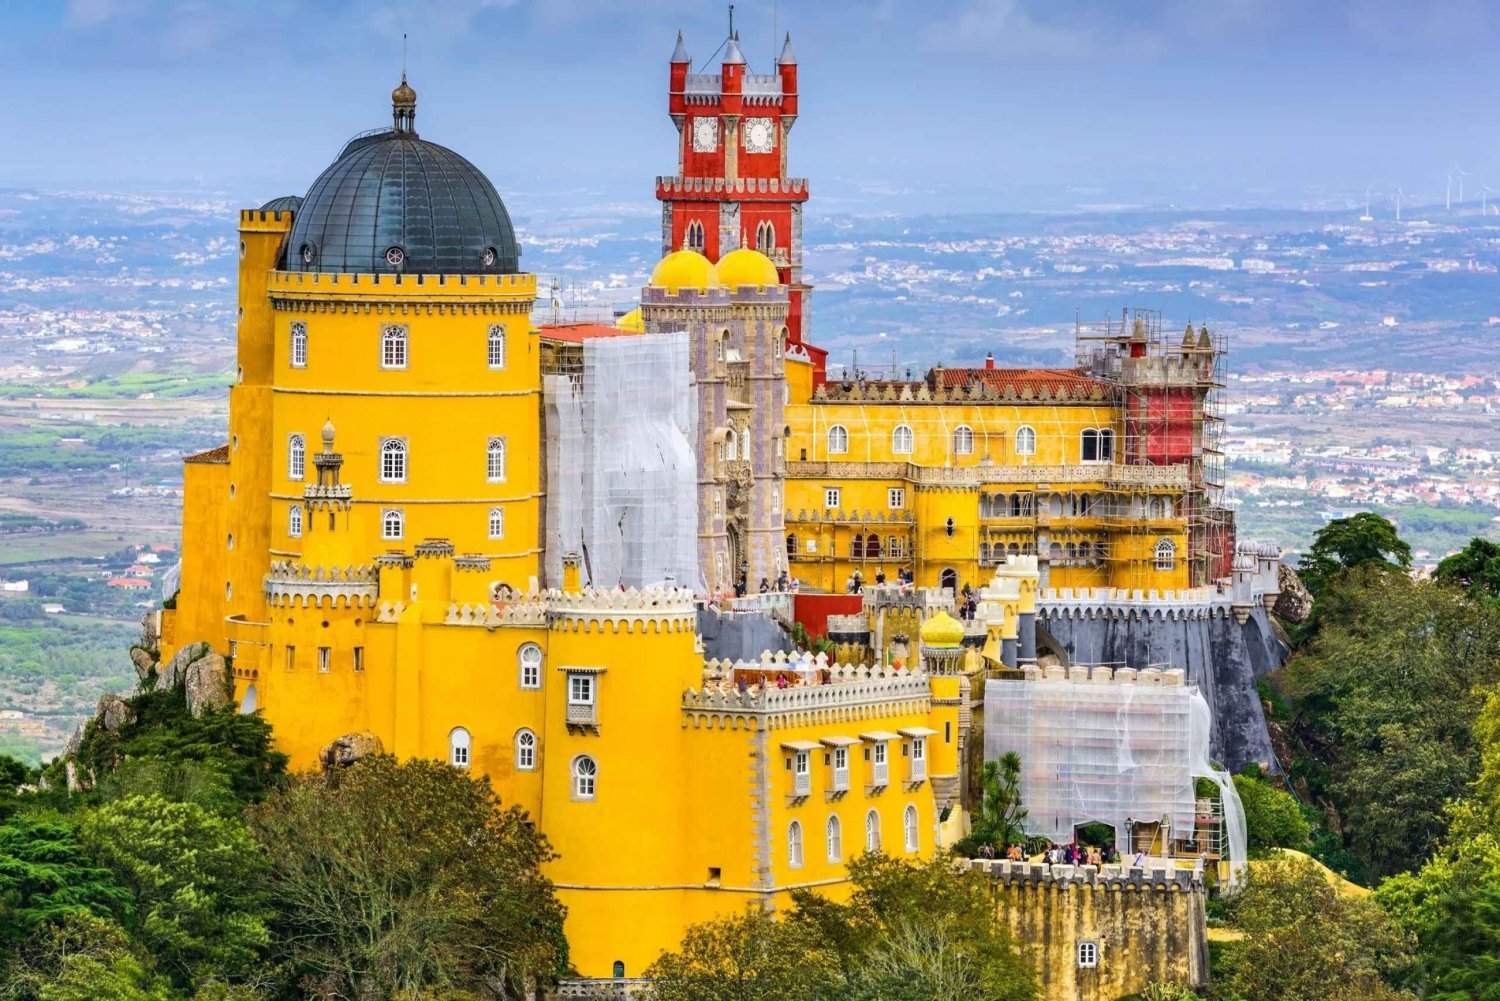 From/To Lisbon: Sintra Hop-on Hop-off Tickets + Audio Guide